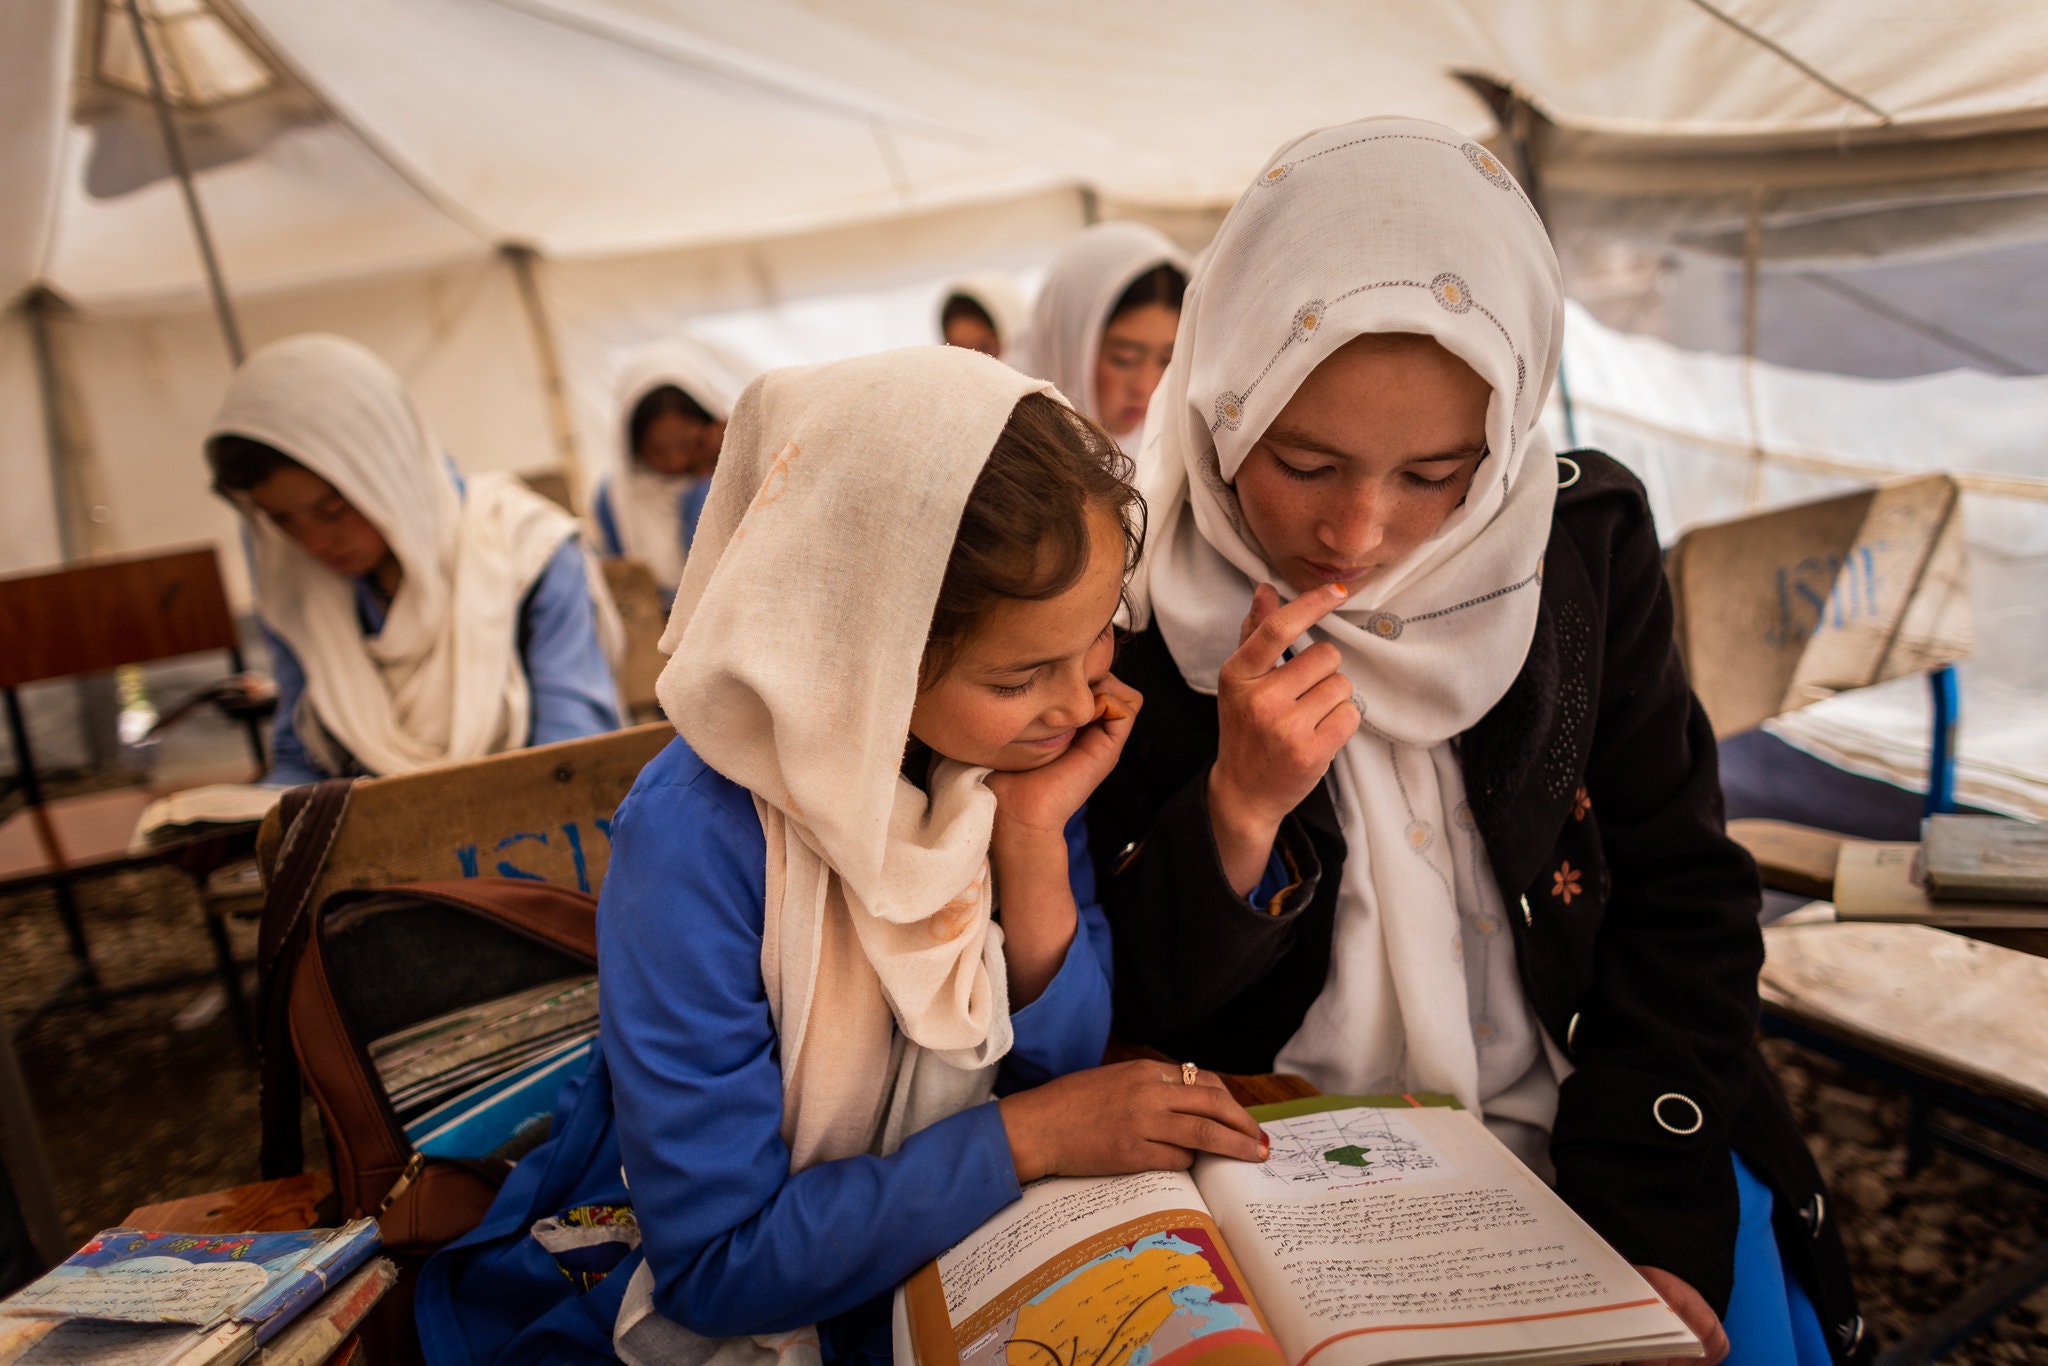 Students sharing a textbook in class in one of the overflow tents at the school.